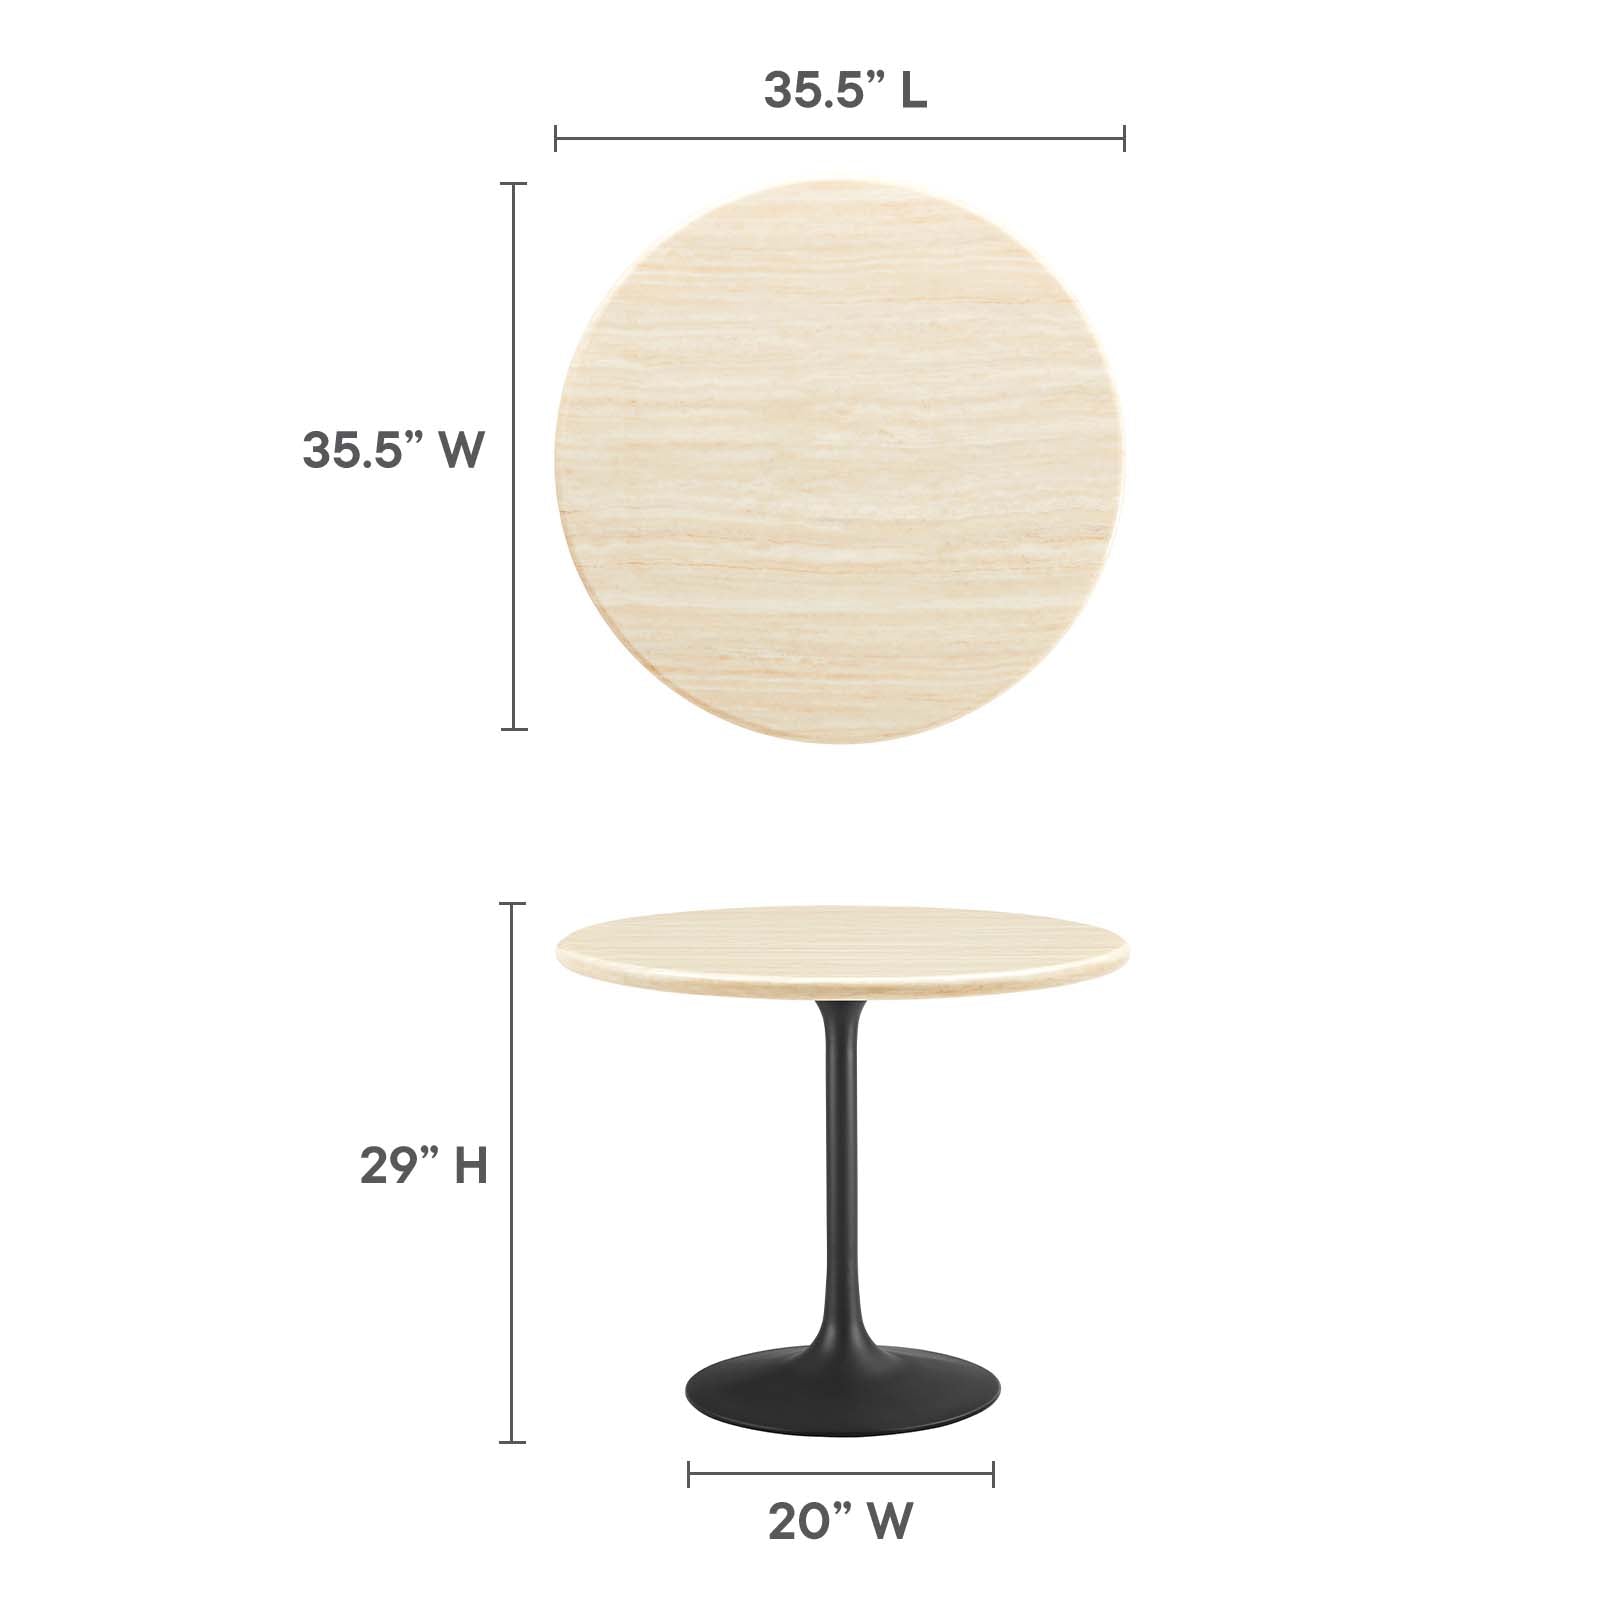 Lippa 36" Round Artificial Travertine Dining Table - East Shore Modern Home Furnishings